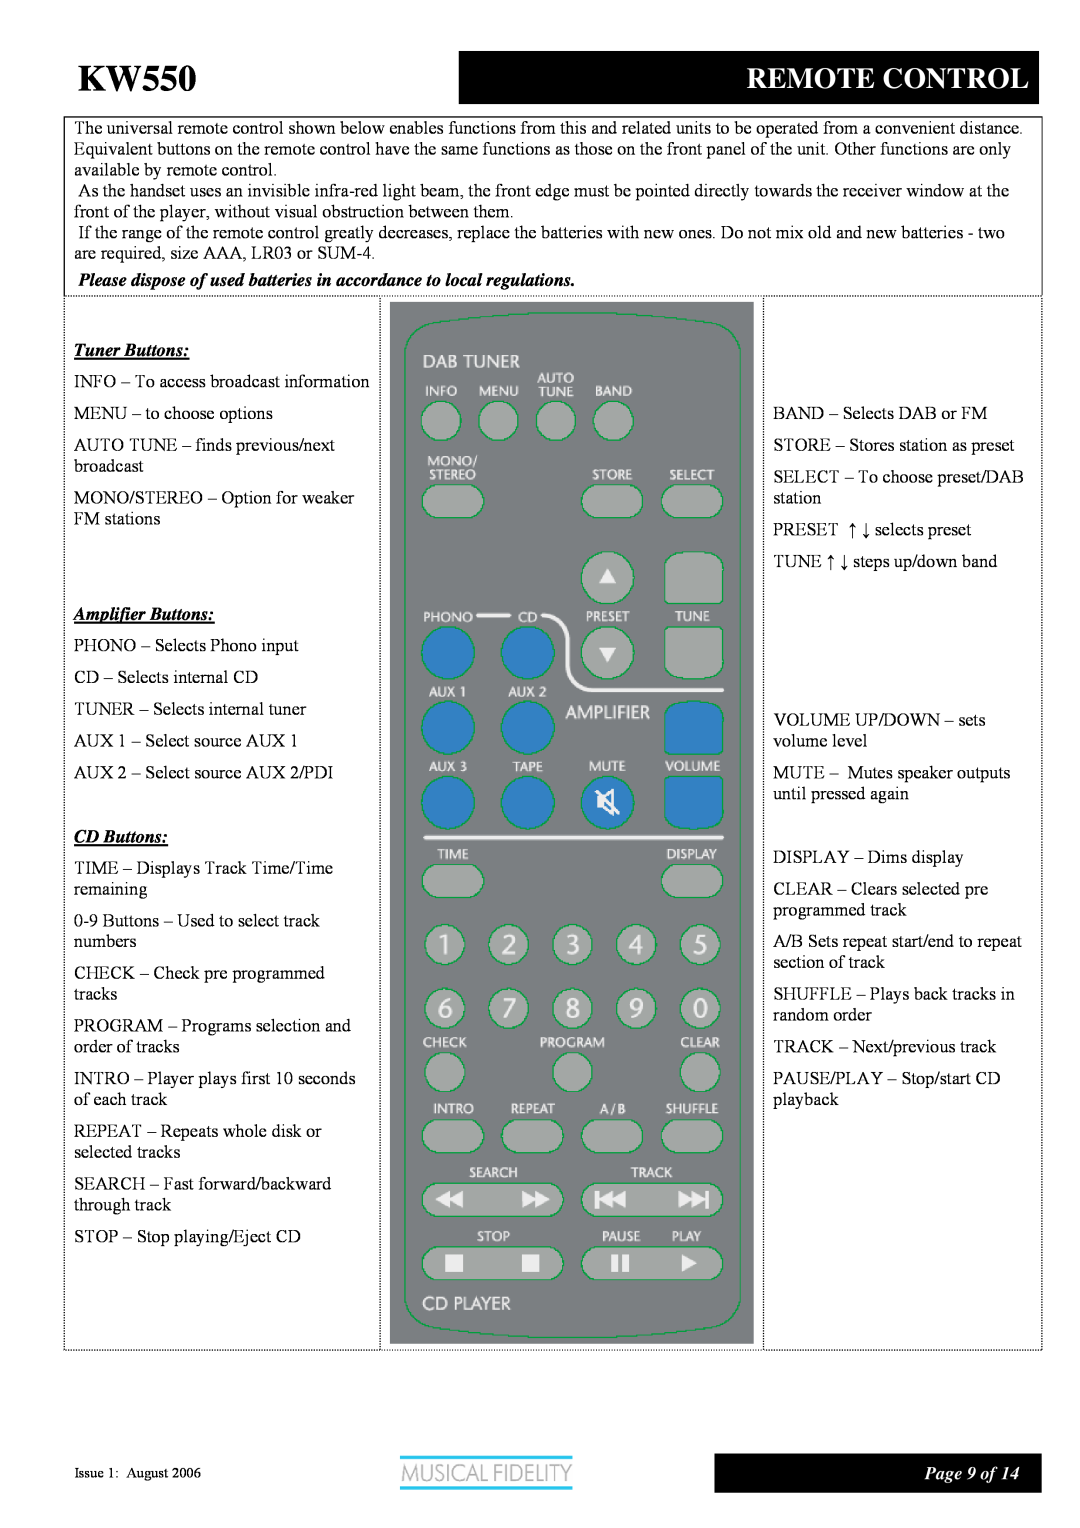 Musical Fidelity KW550 manual Remote Control, Tuner Buttons, Amplifier Buttons, CD Buttons, Page 9 of 